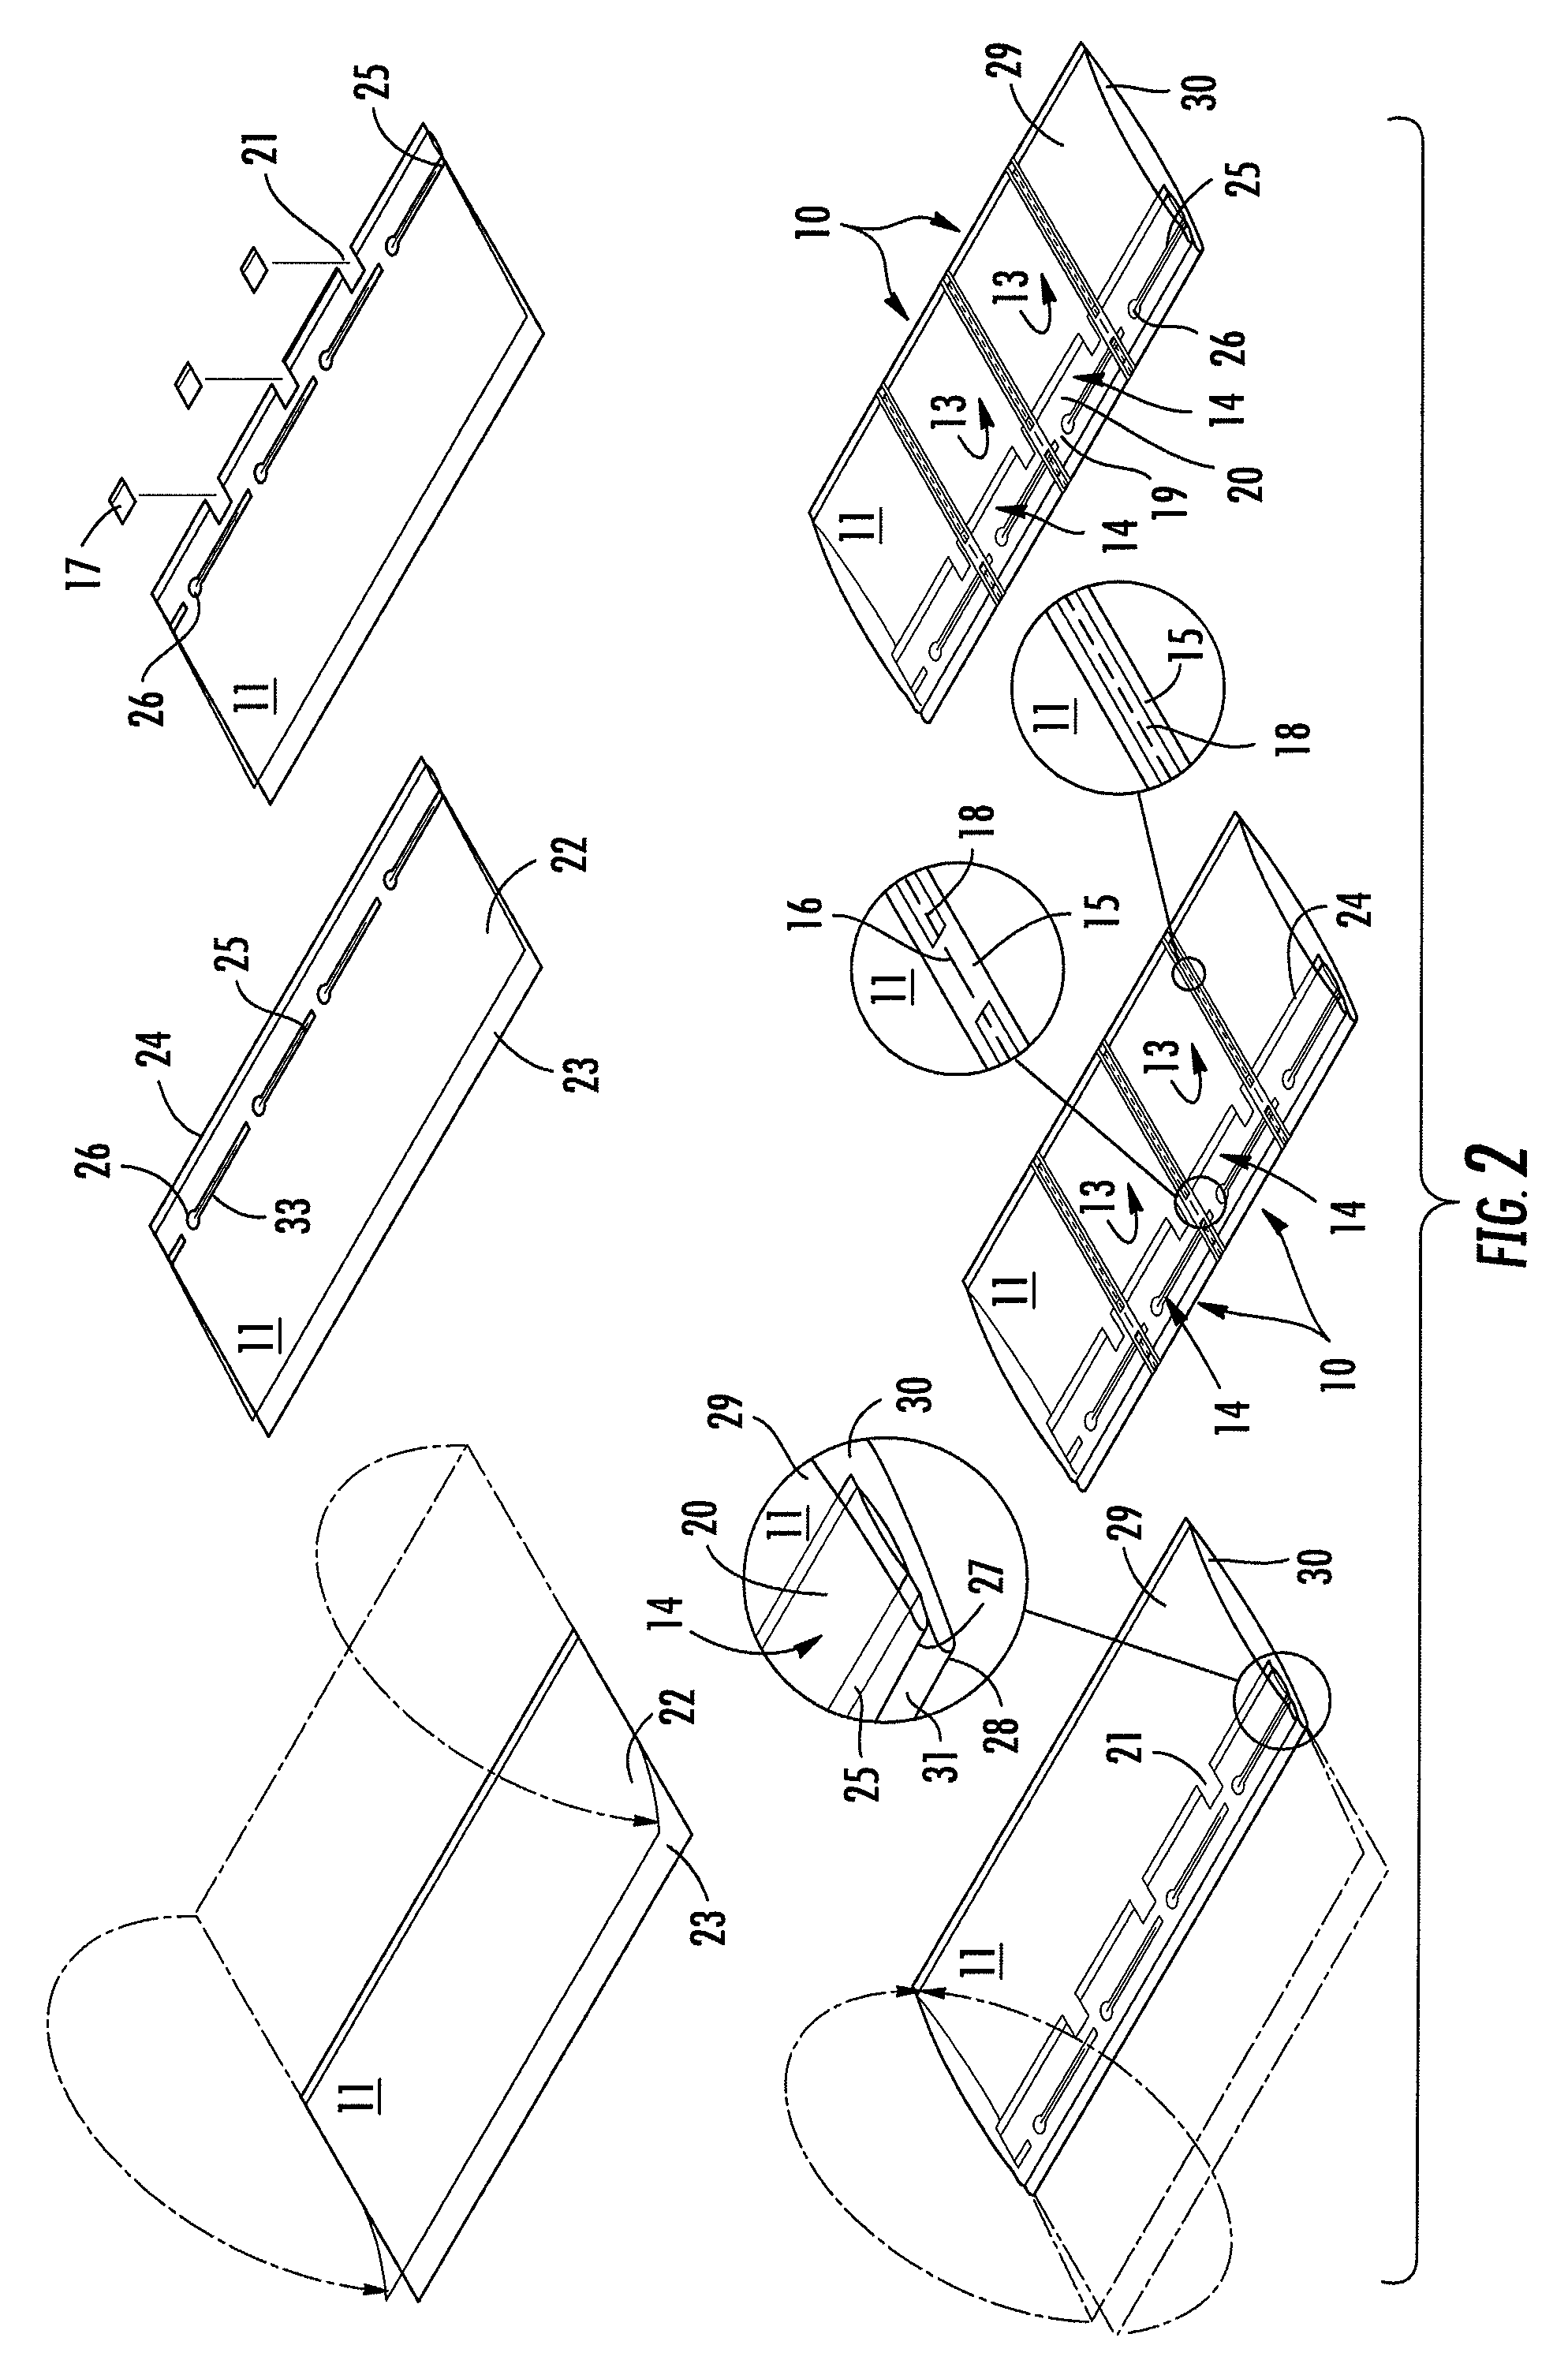 Inflatable structure for packaging and associated apparatus and method